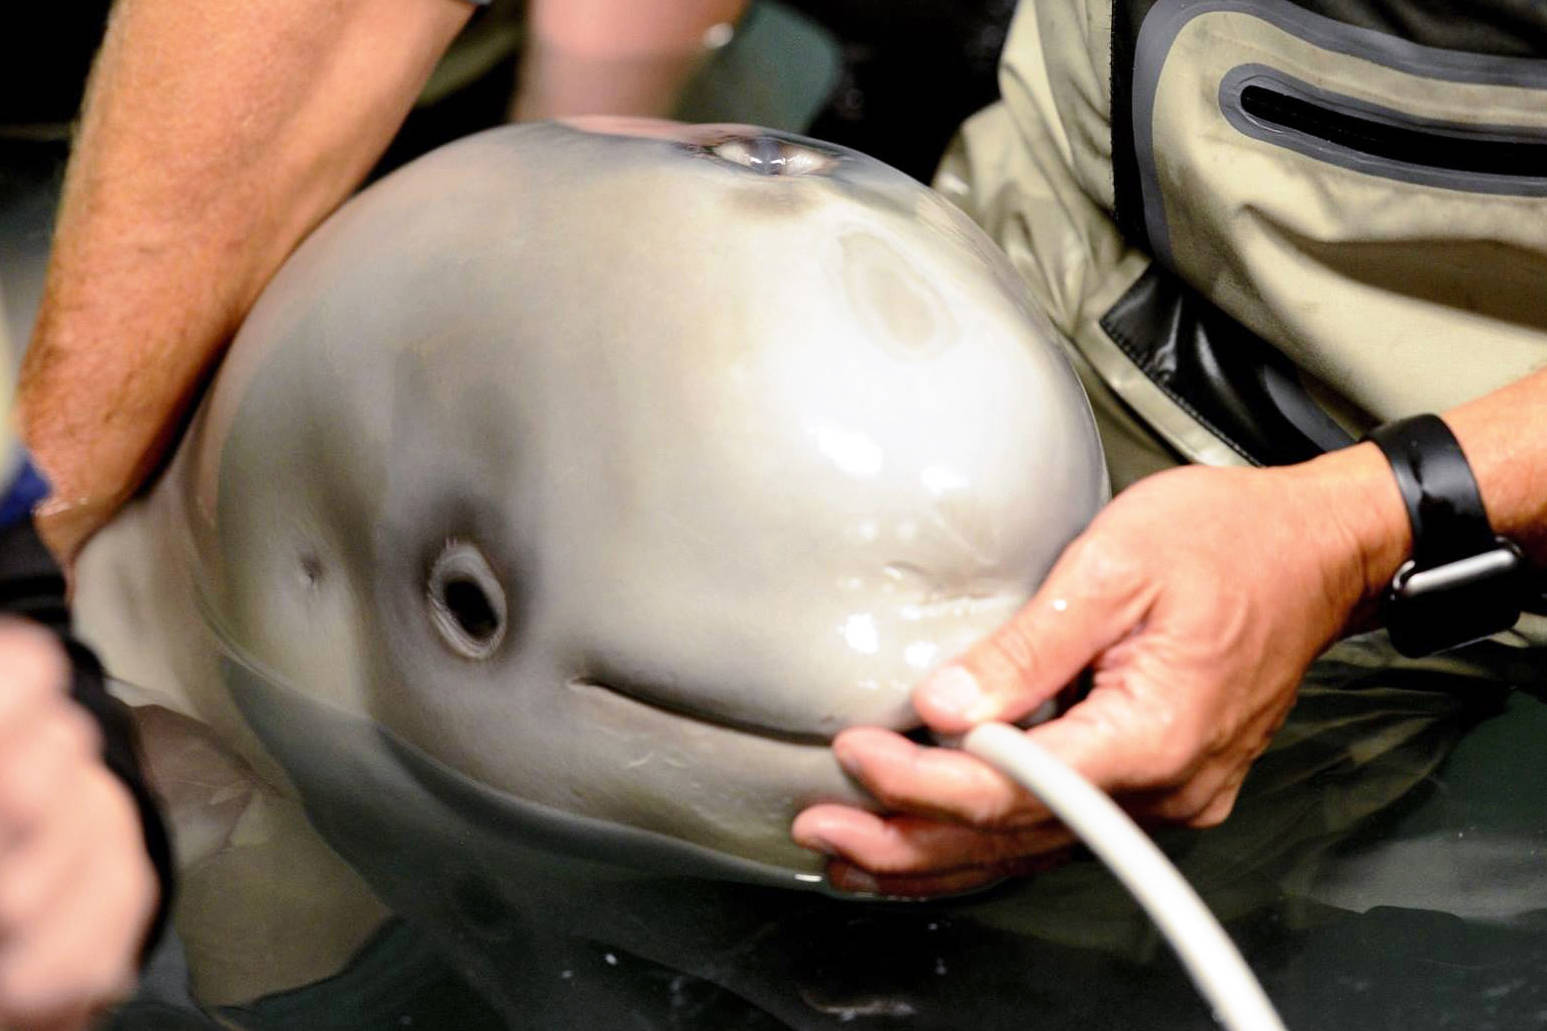 In this October 2017 file photo, volunteers at the Alaska SeaLife Center feed beluga calf Tyonek, who was rescued on Sept. 30, 2017, after he was stranded in Trading Bay. The first Cook Inlet beluga under human care, Tyonek now lives at SeaWorld San Antonio in Texas. (Photo courtesy of Alaska SeaLife Center).